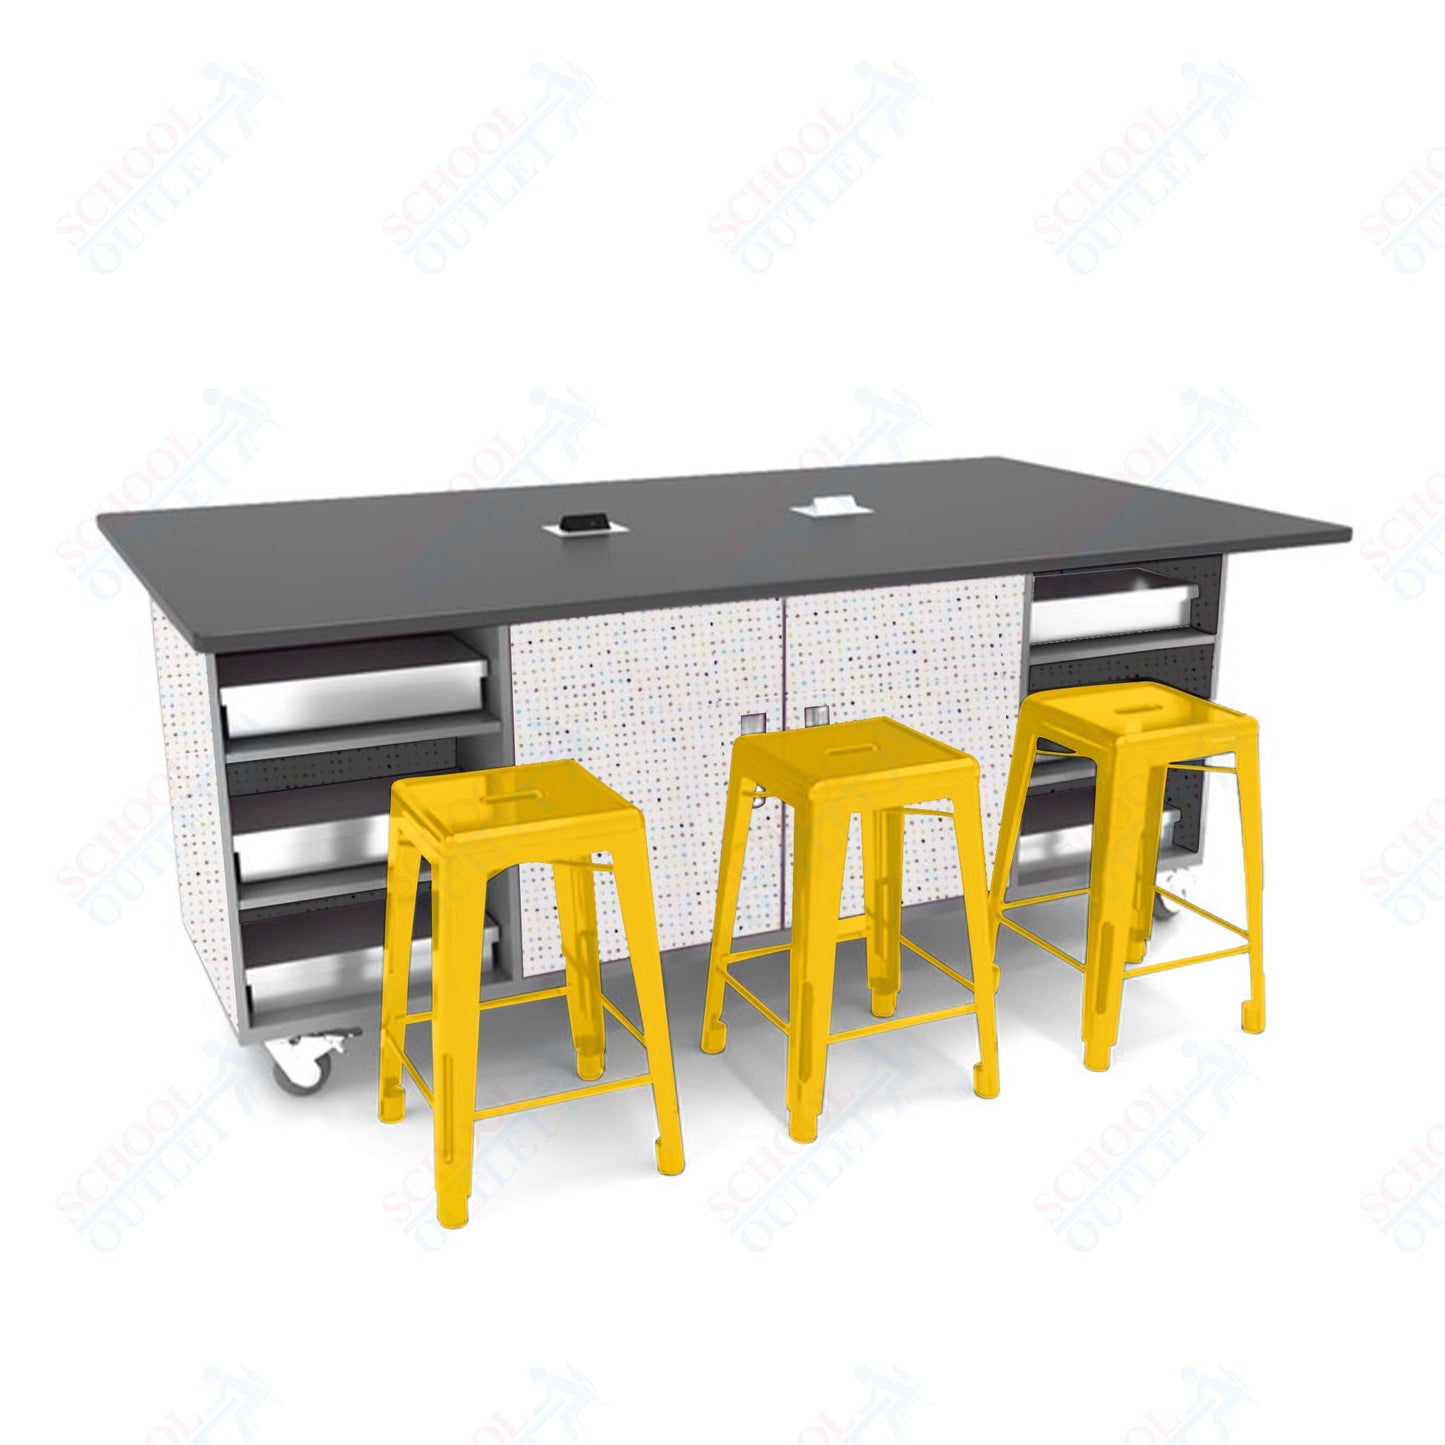 CEF ED Double Table 42"H Tough Top, Laminate Base with  6 Stools, Storage bins, and Electrical Outlets Included.